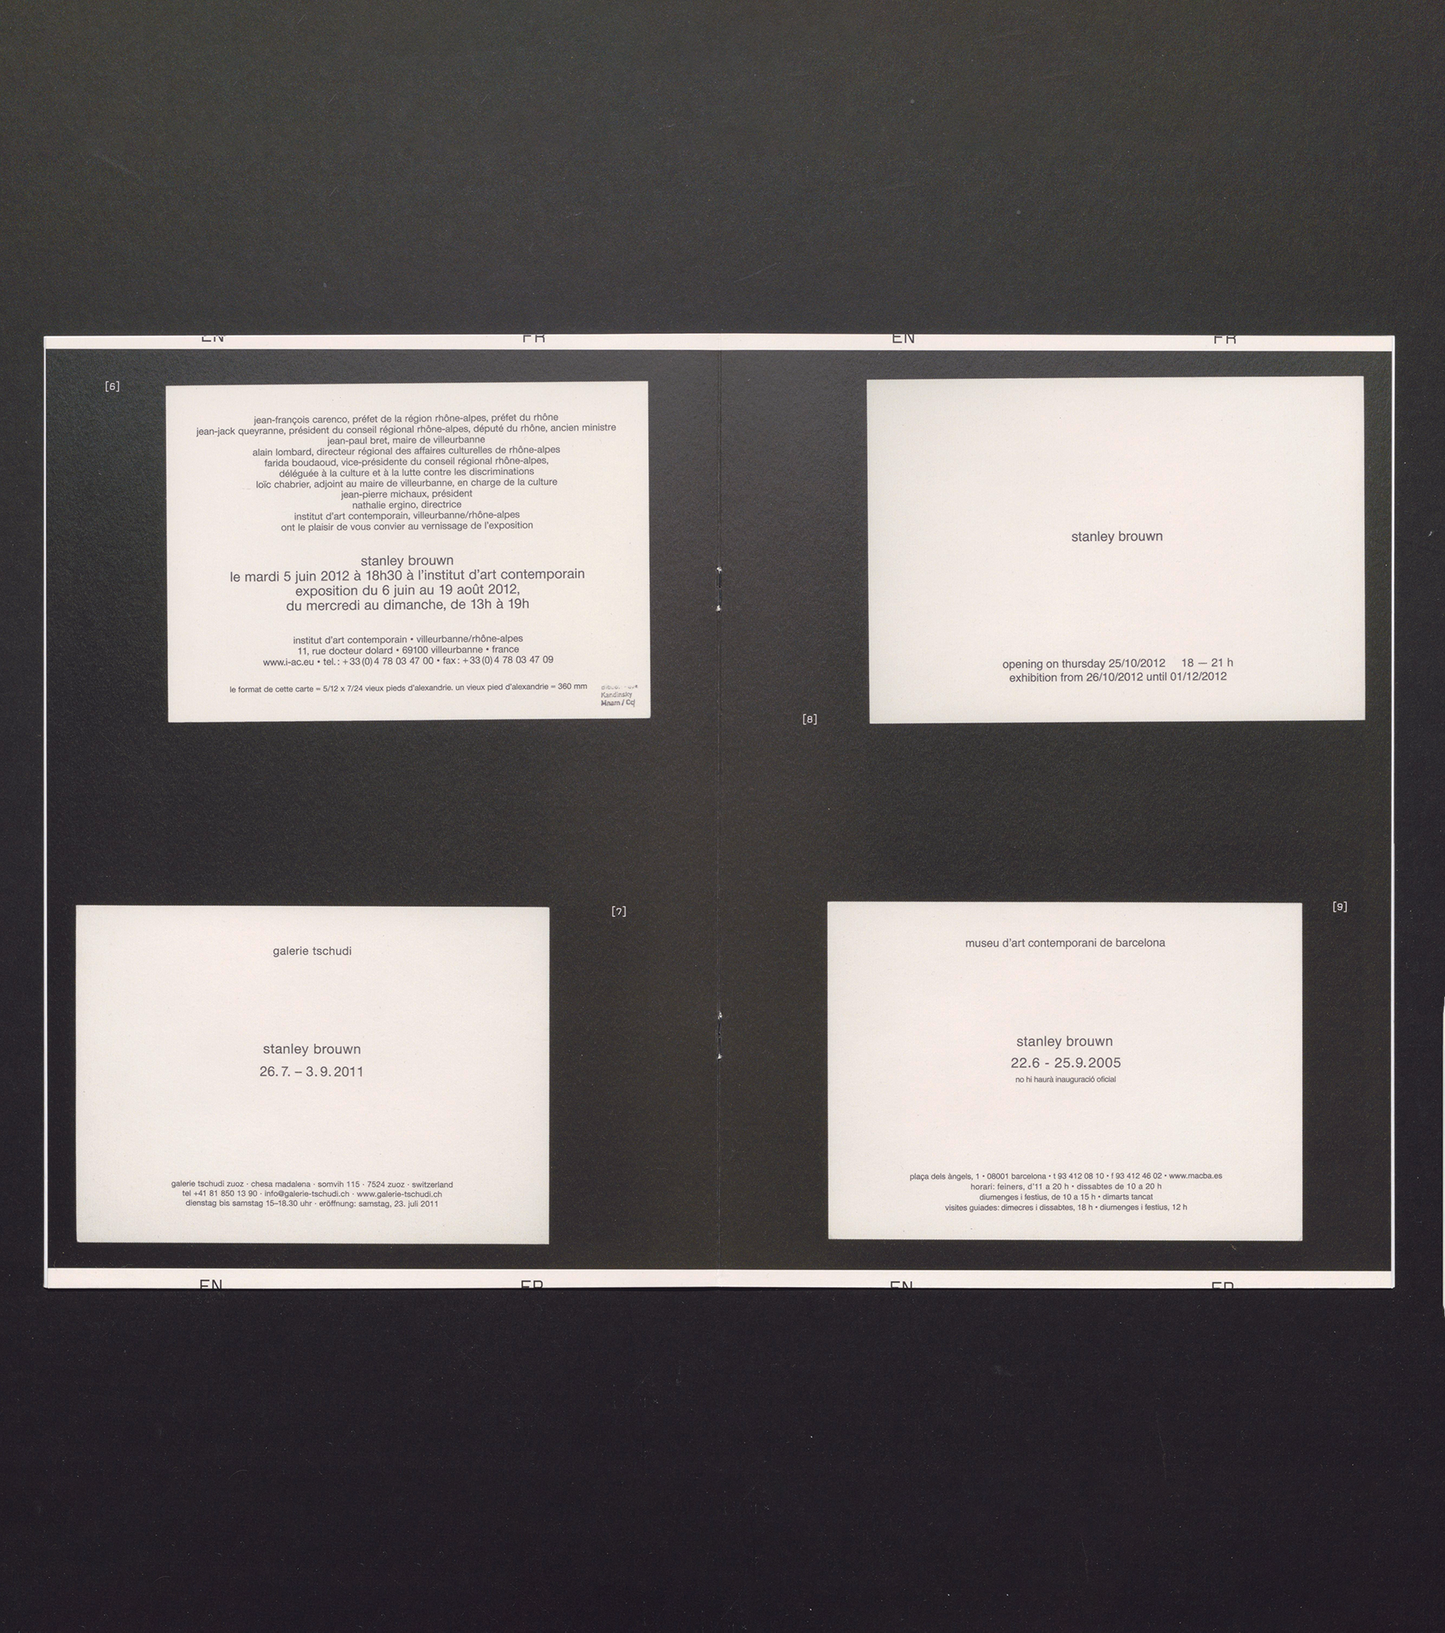 Revue Faire No. 04 - A communication: invitation cards by the artist Stanley Brouwn.